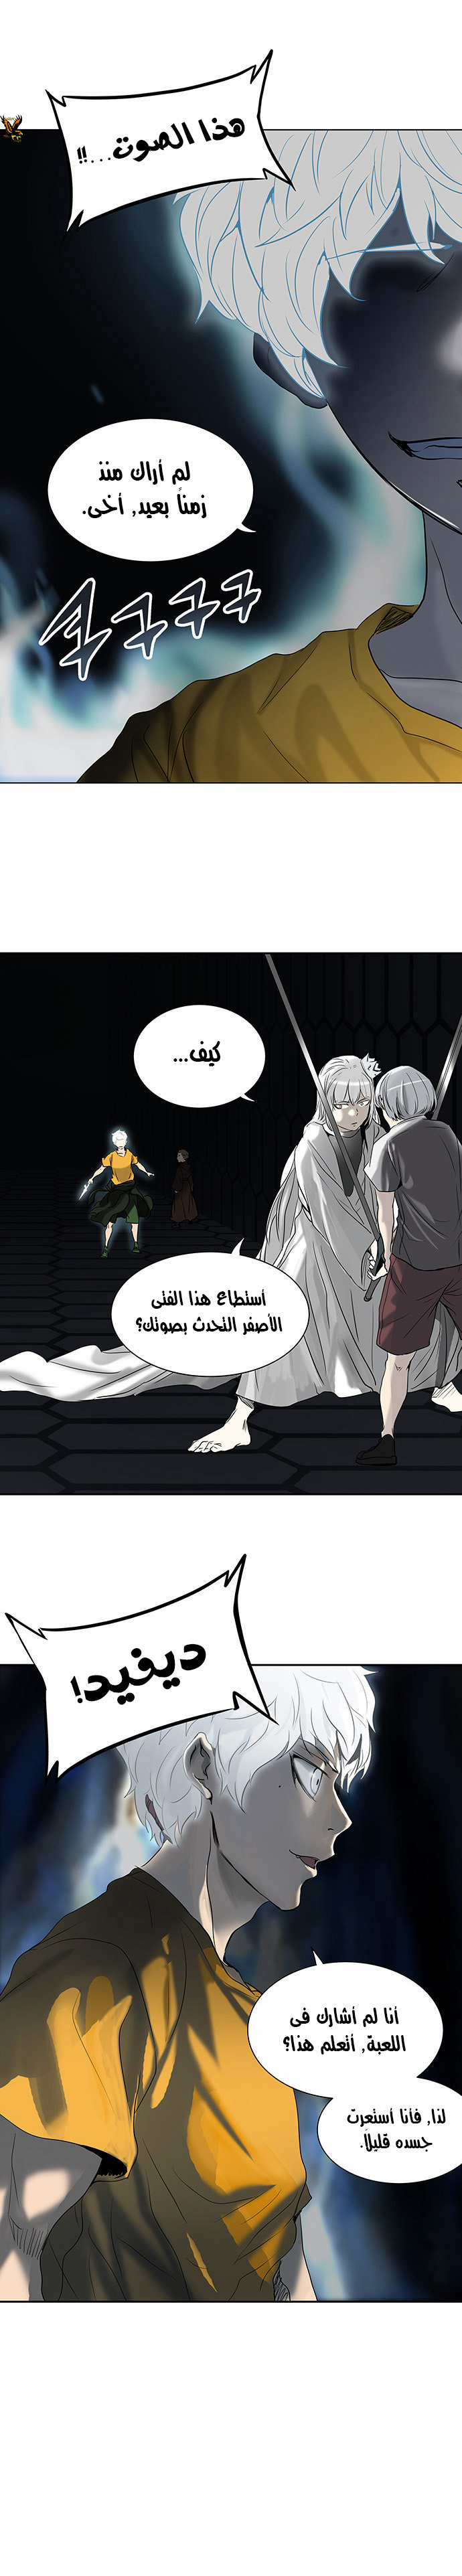 Tower of God 2: Chapter 182 - Page 1